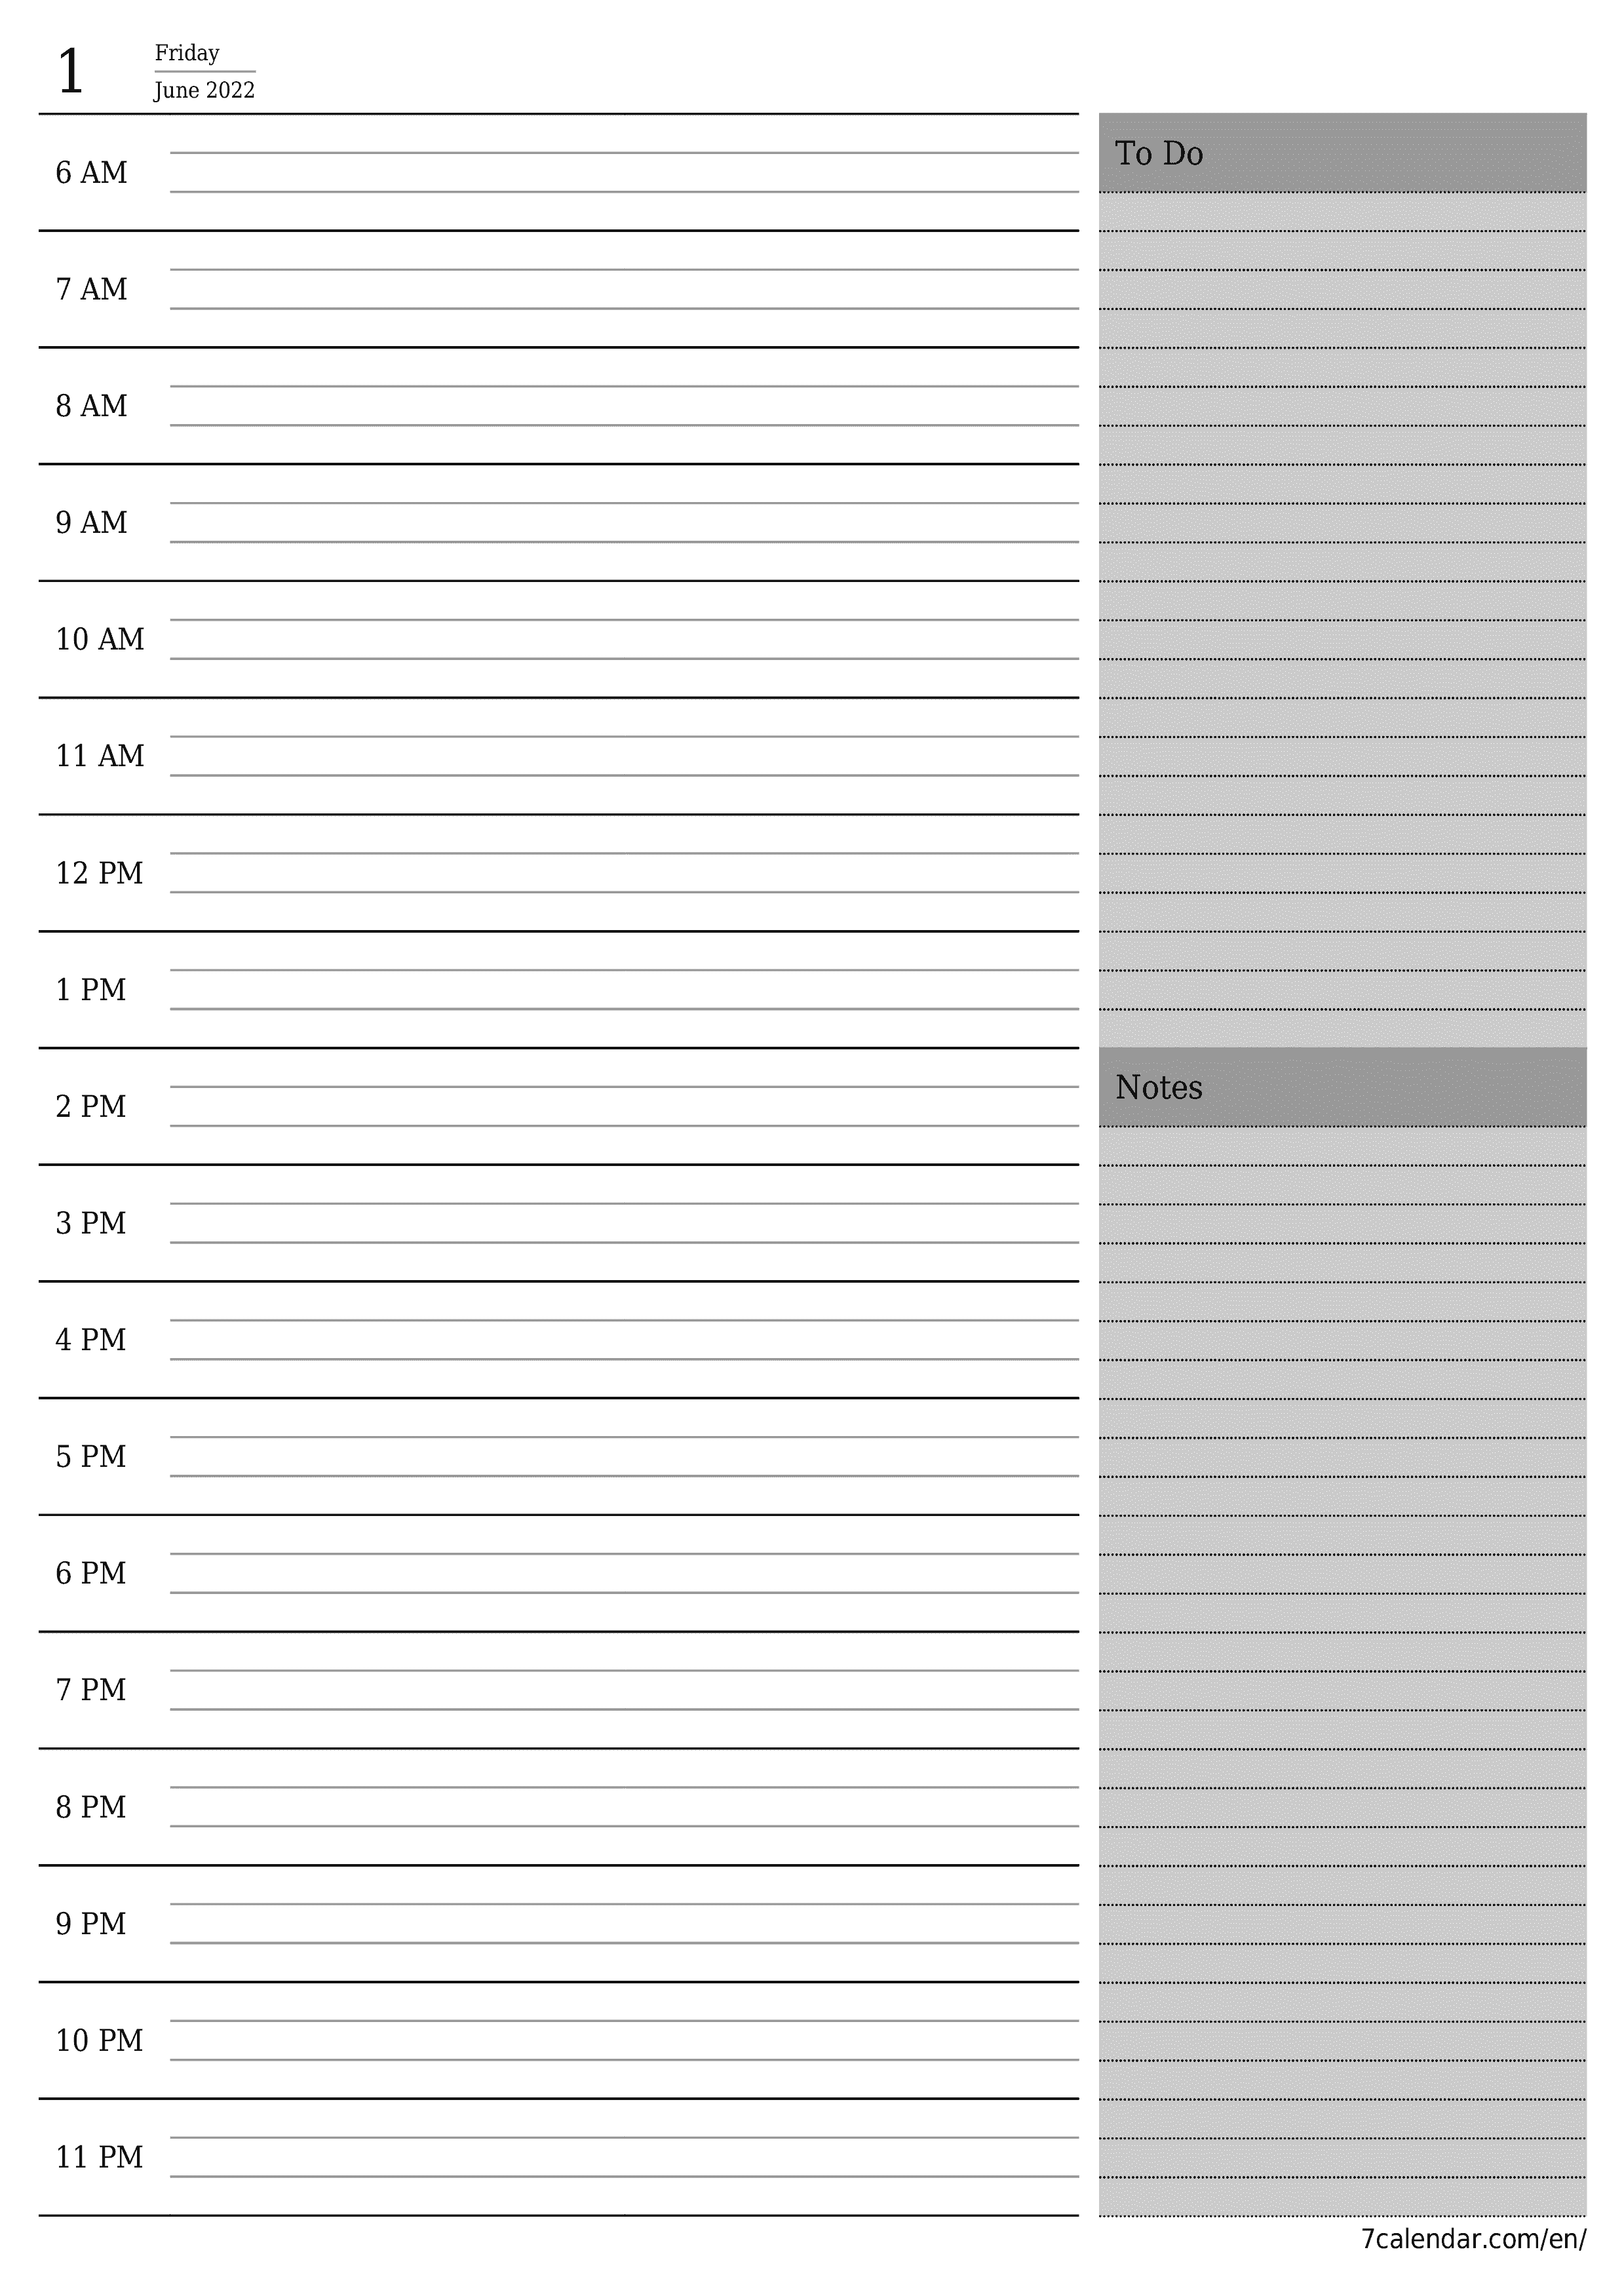 Blank daily printable calendar and planner for day June 2022 with notes, save and print to PDF PNG English